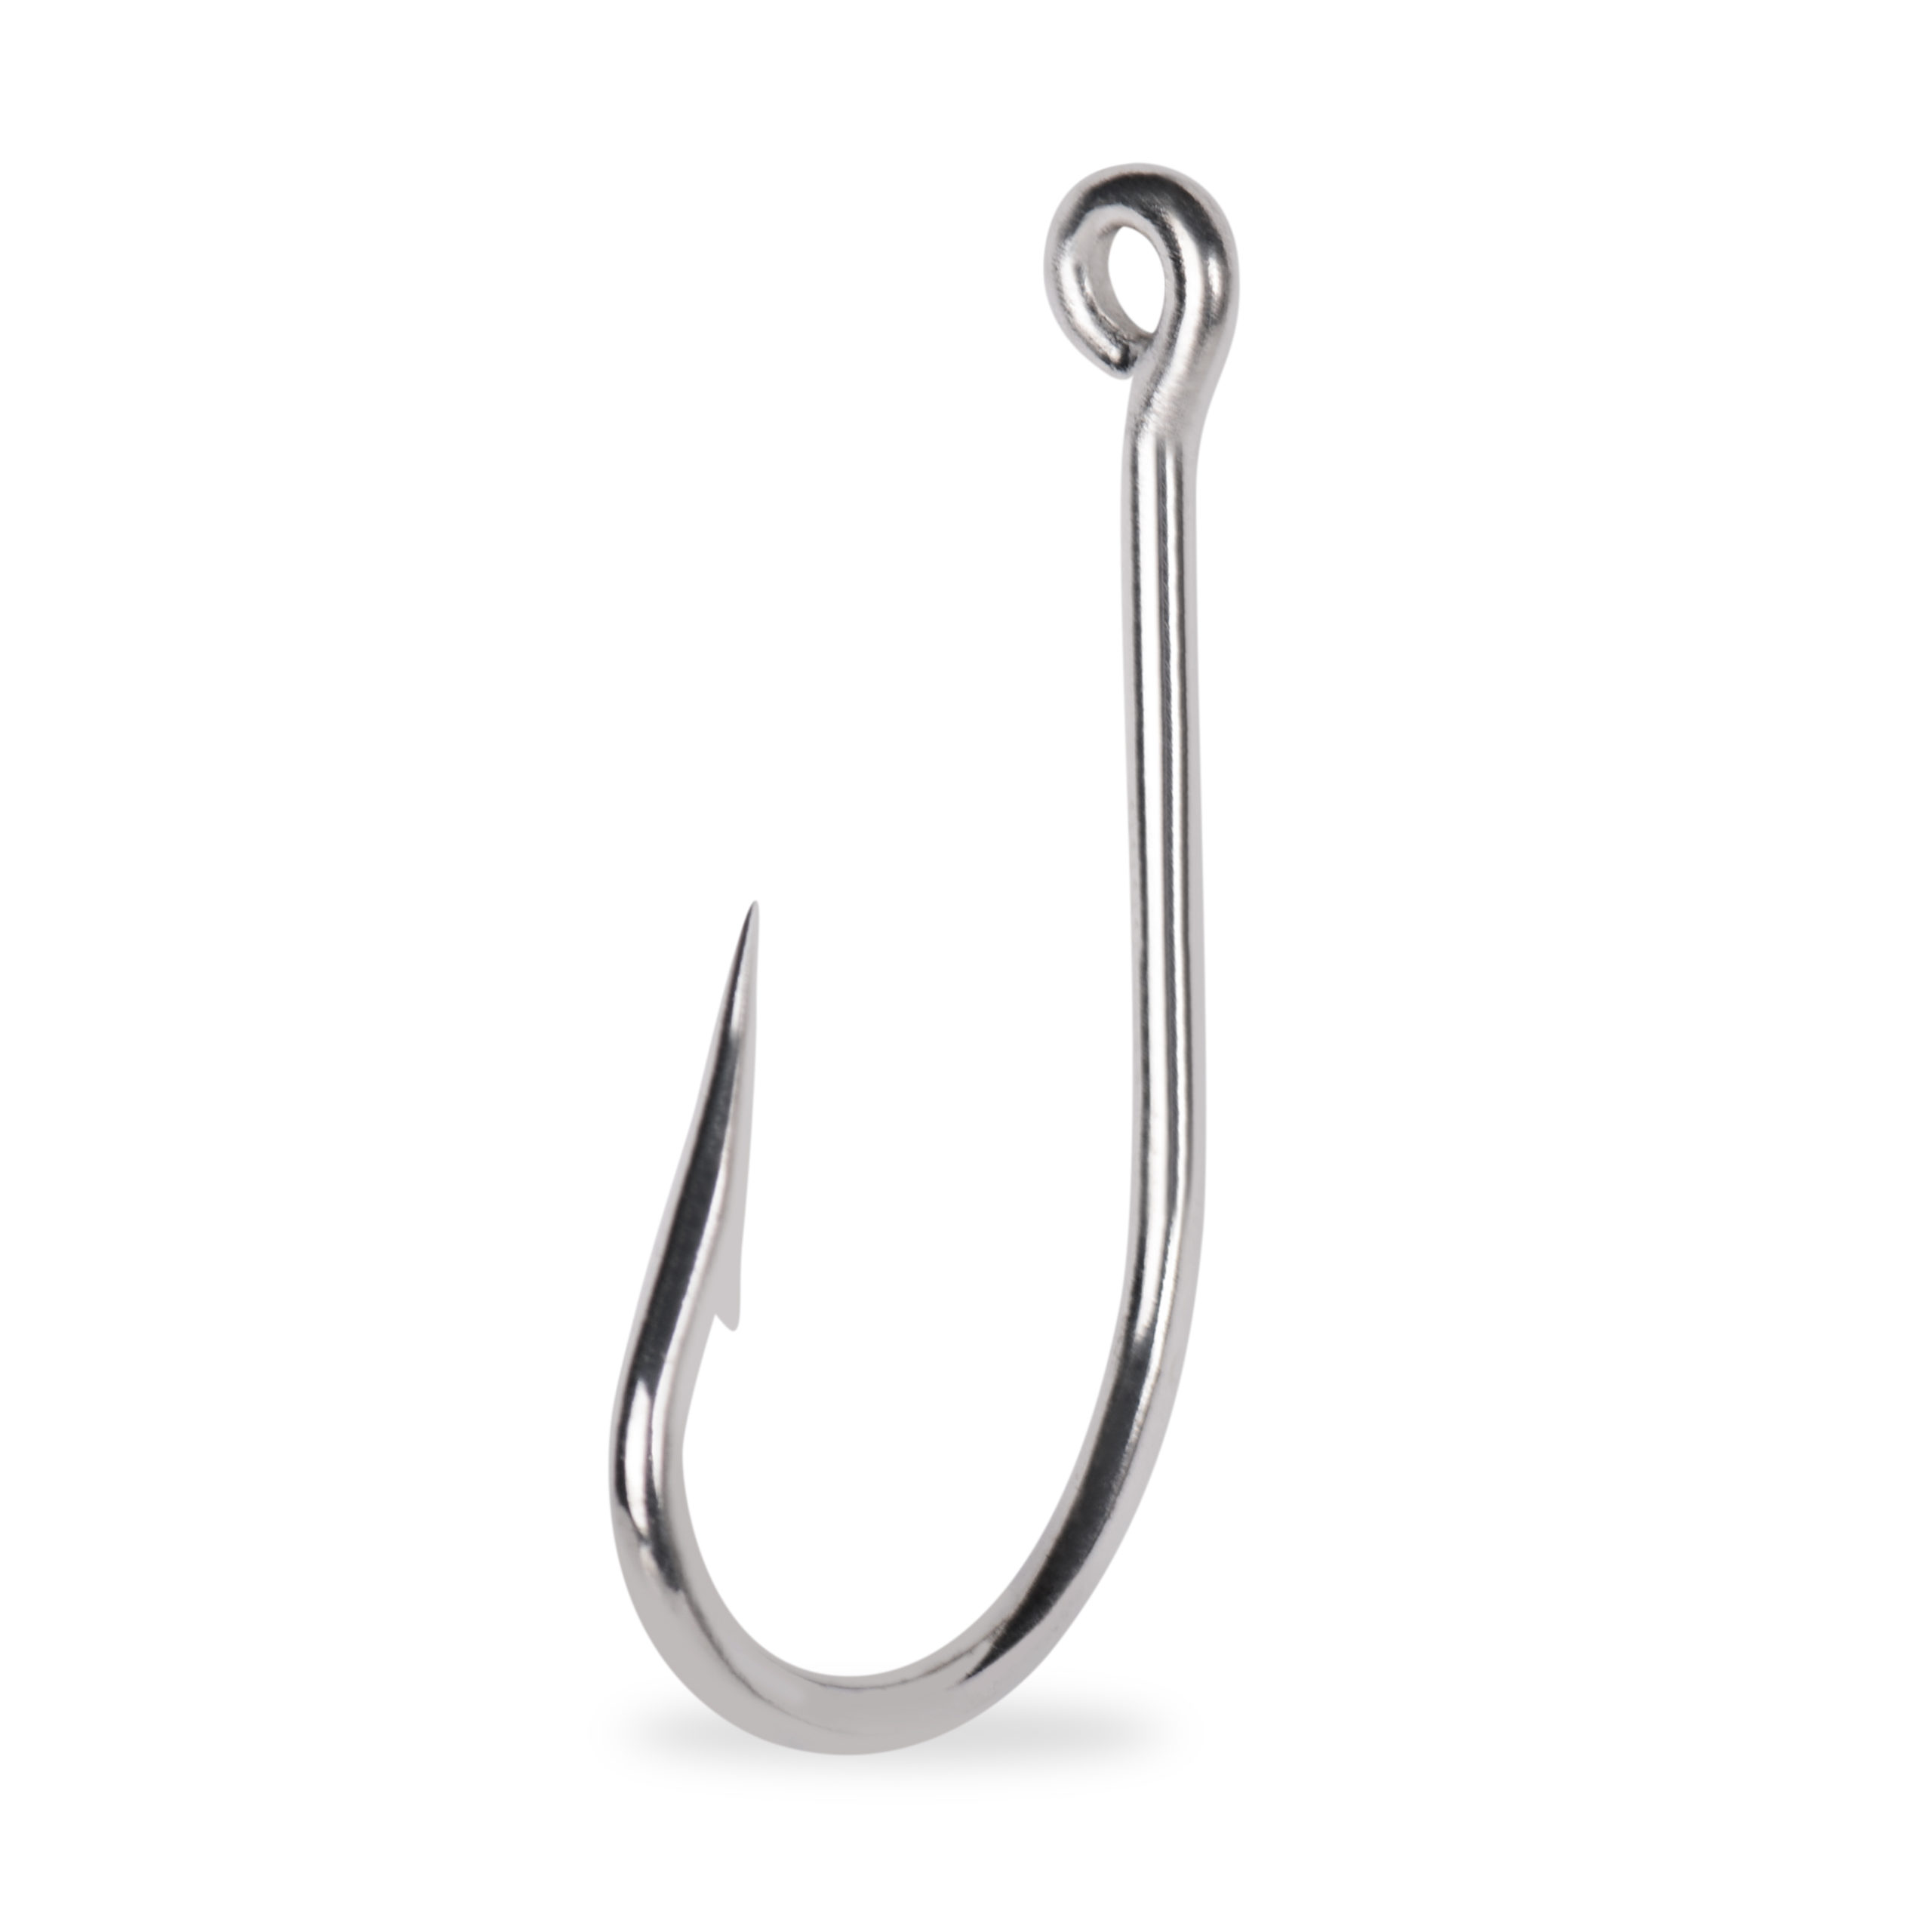 TOPIND 7691 Stainless Steel Fishing Hooks with Silver Size 3/0 to 13/0 5pcs